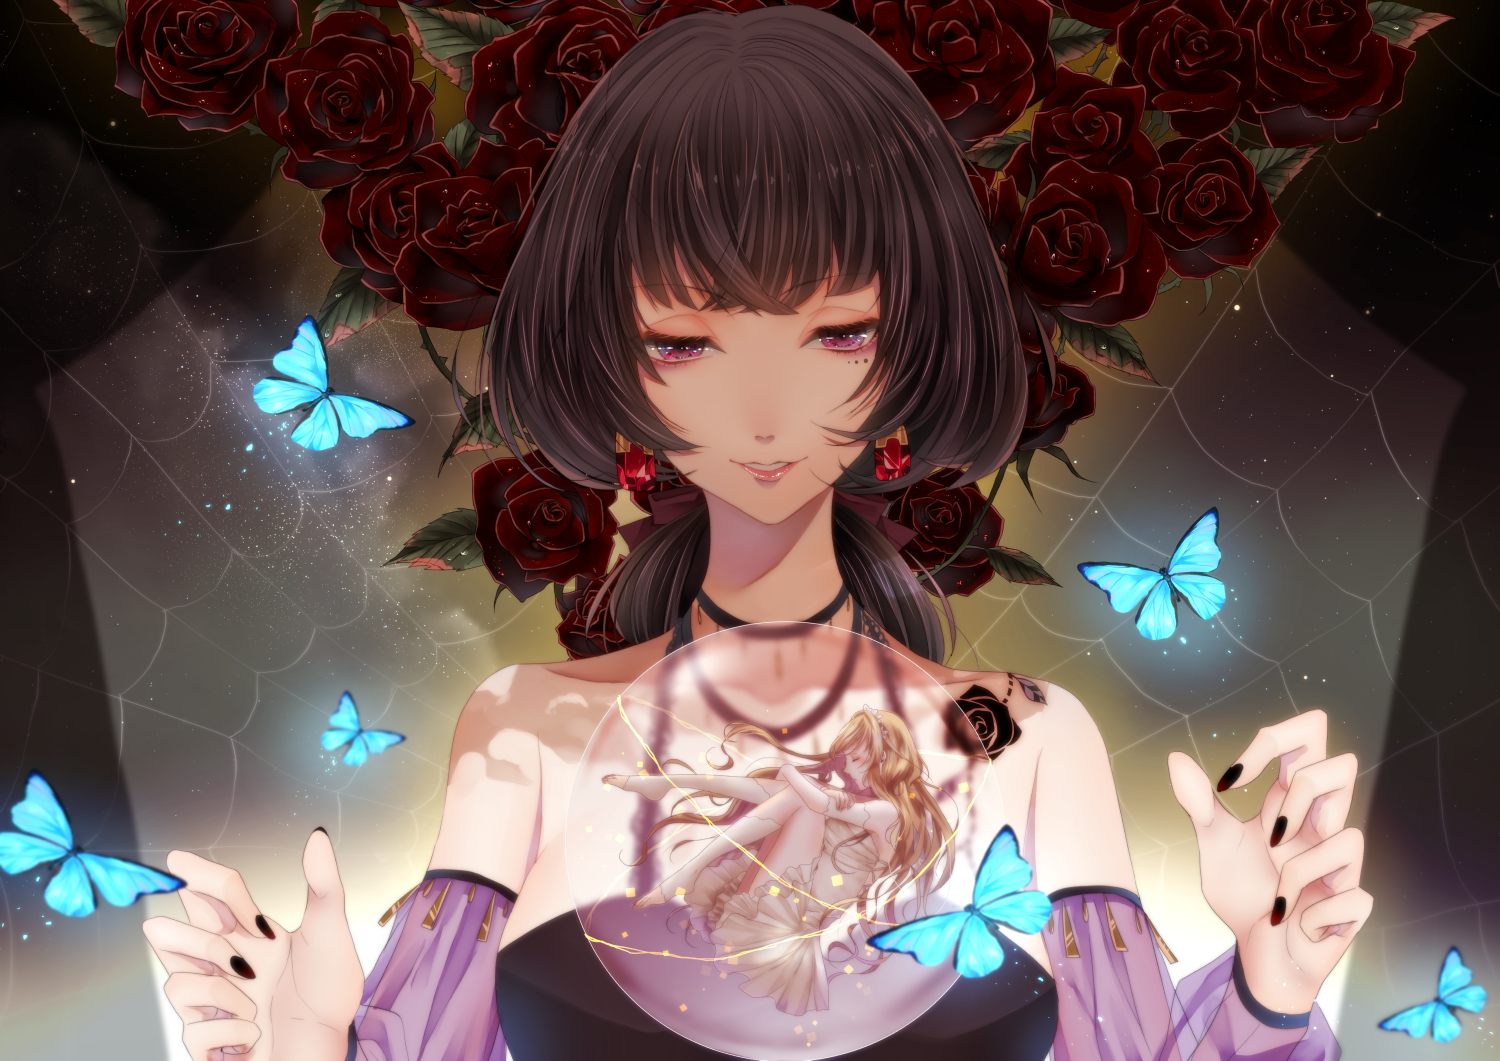 Anime 1500x1061 anime anime girls long hair brunette red eyes spiderwebs black nails long nails tattoo earring women butterfly painted nails rose plants Pixiv